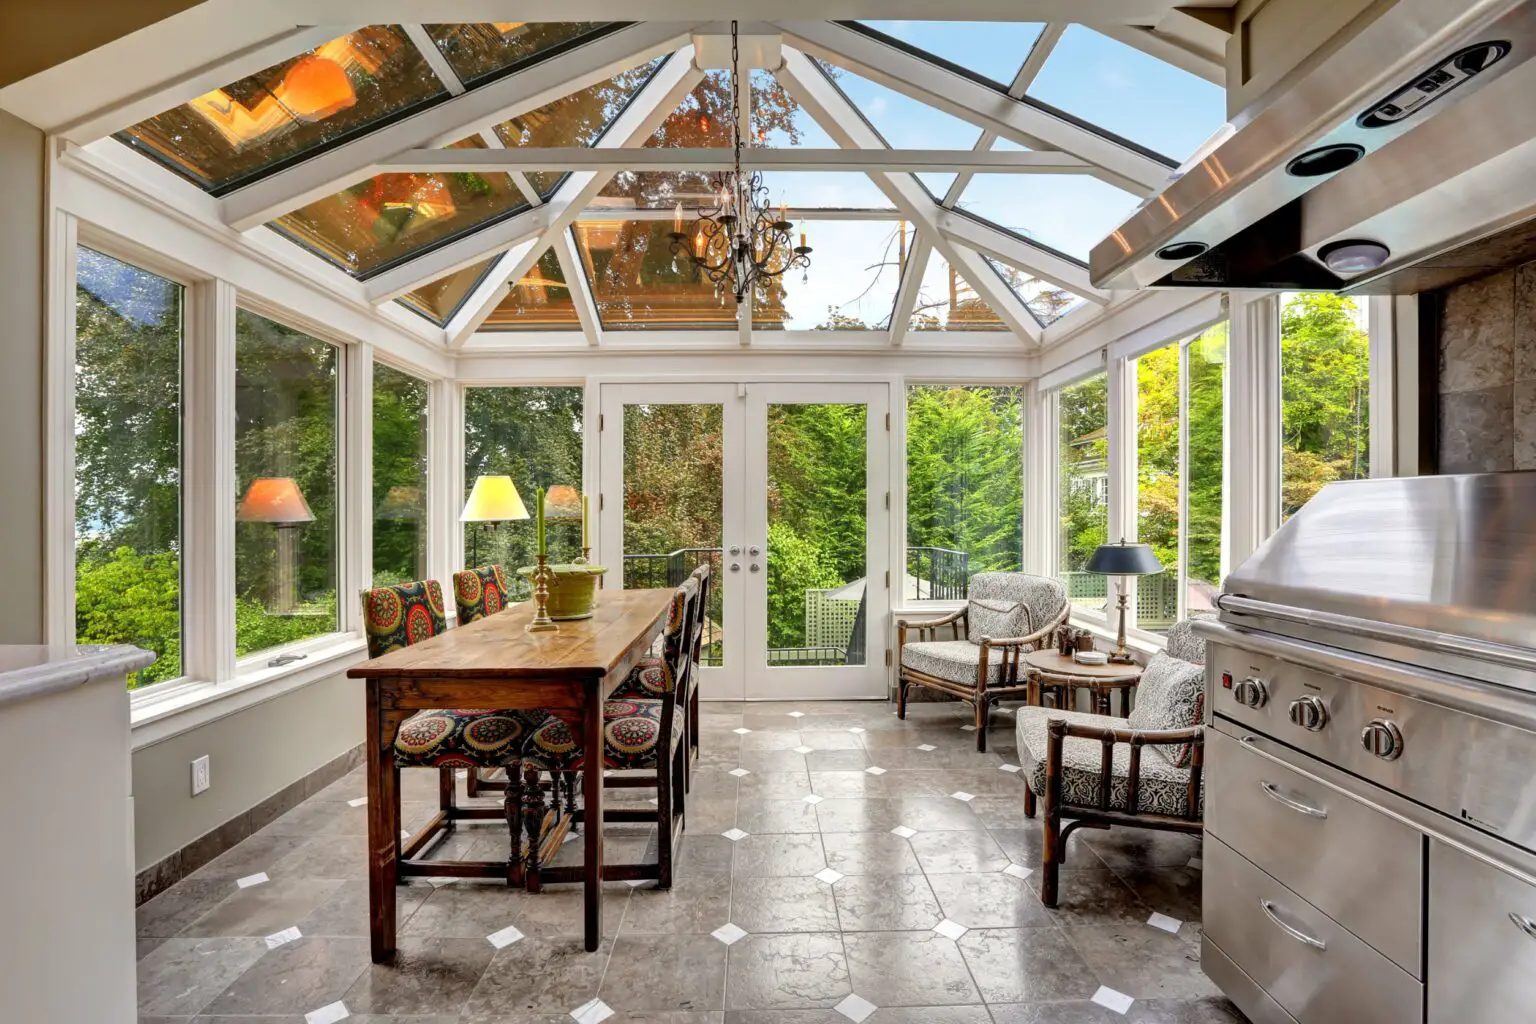 How To Build A Sunroom On An Existing Patio 